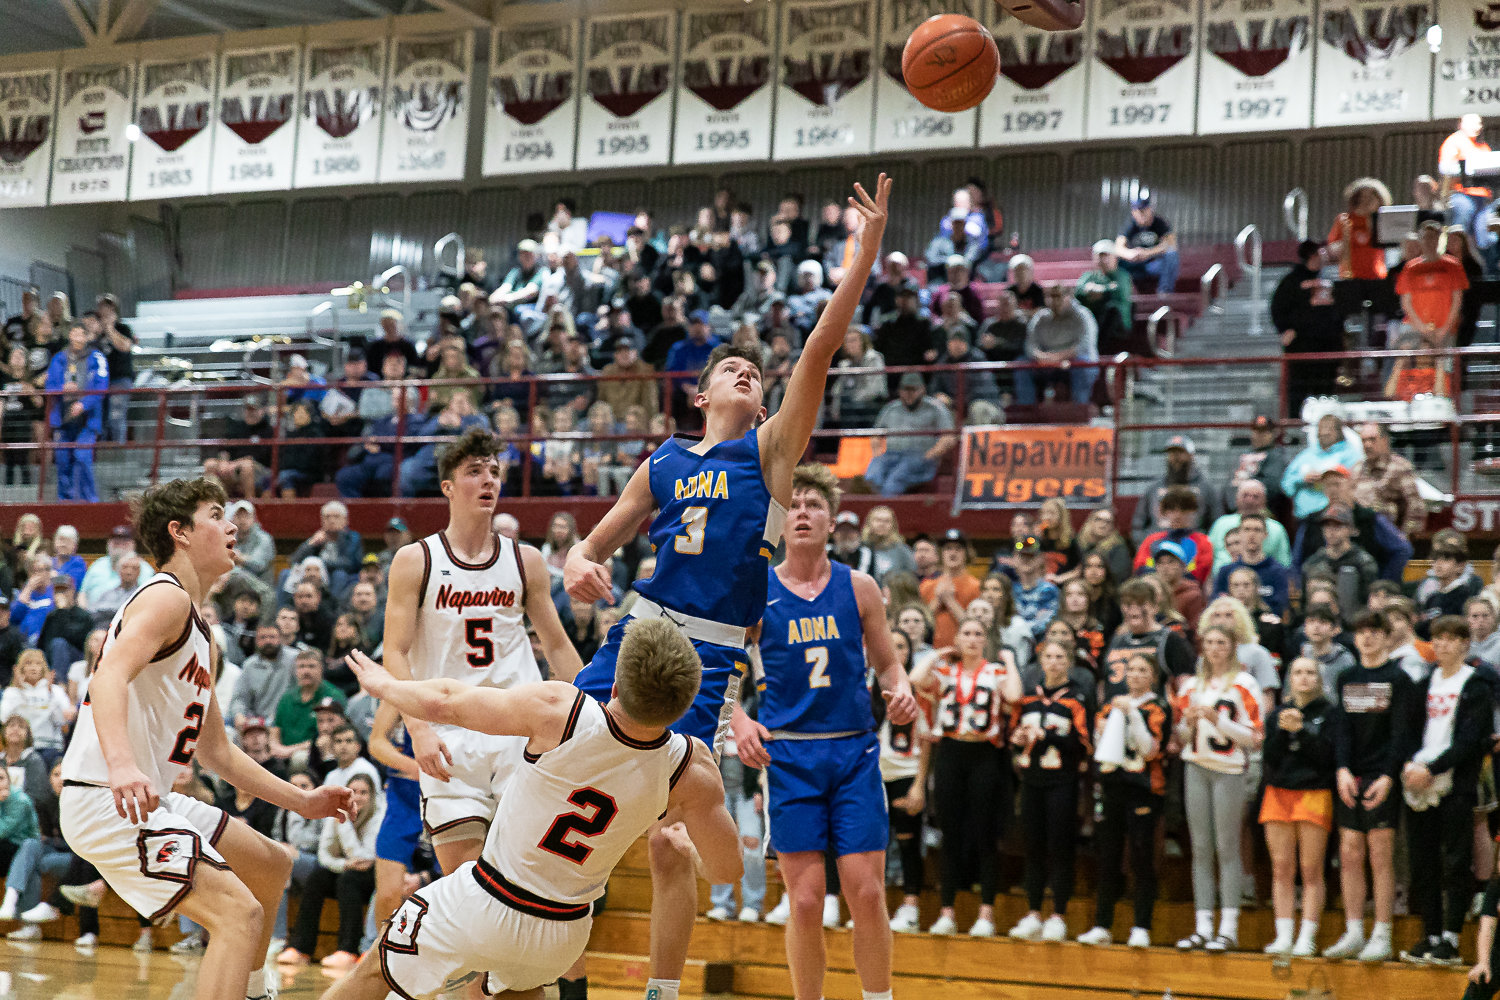 Adna guard Braeden Salme looks to make a layup while Napavine's Cael Stanley tries to draw a charge in the 2B District 4 quarterfinals at W.F. West Feb. 8.